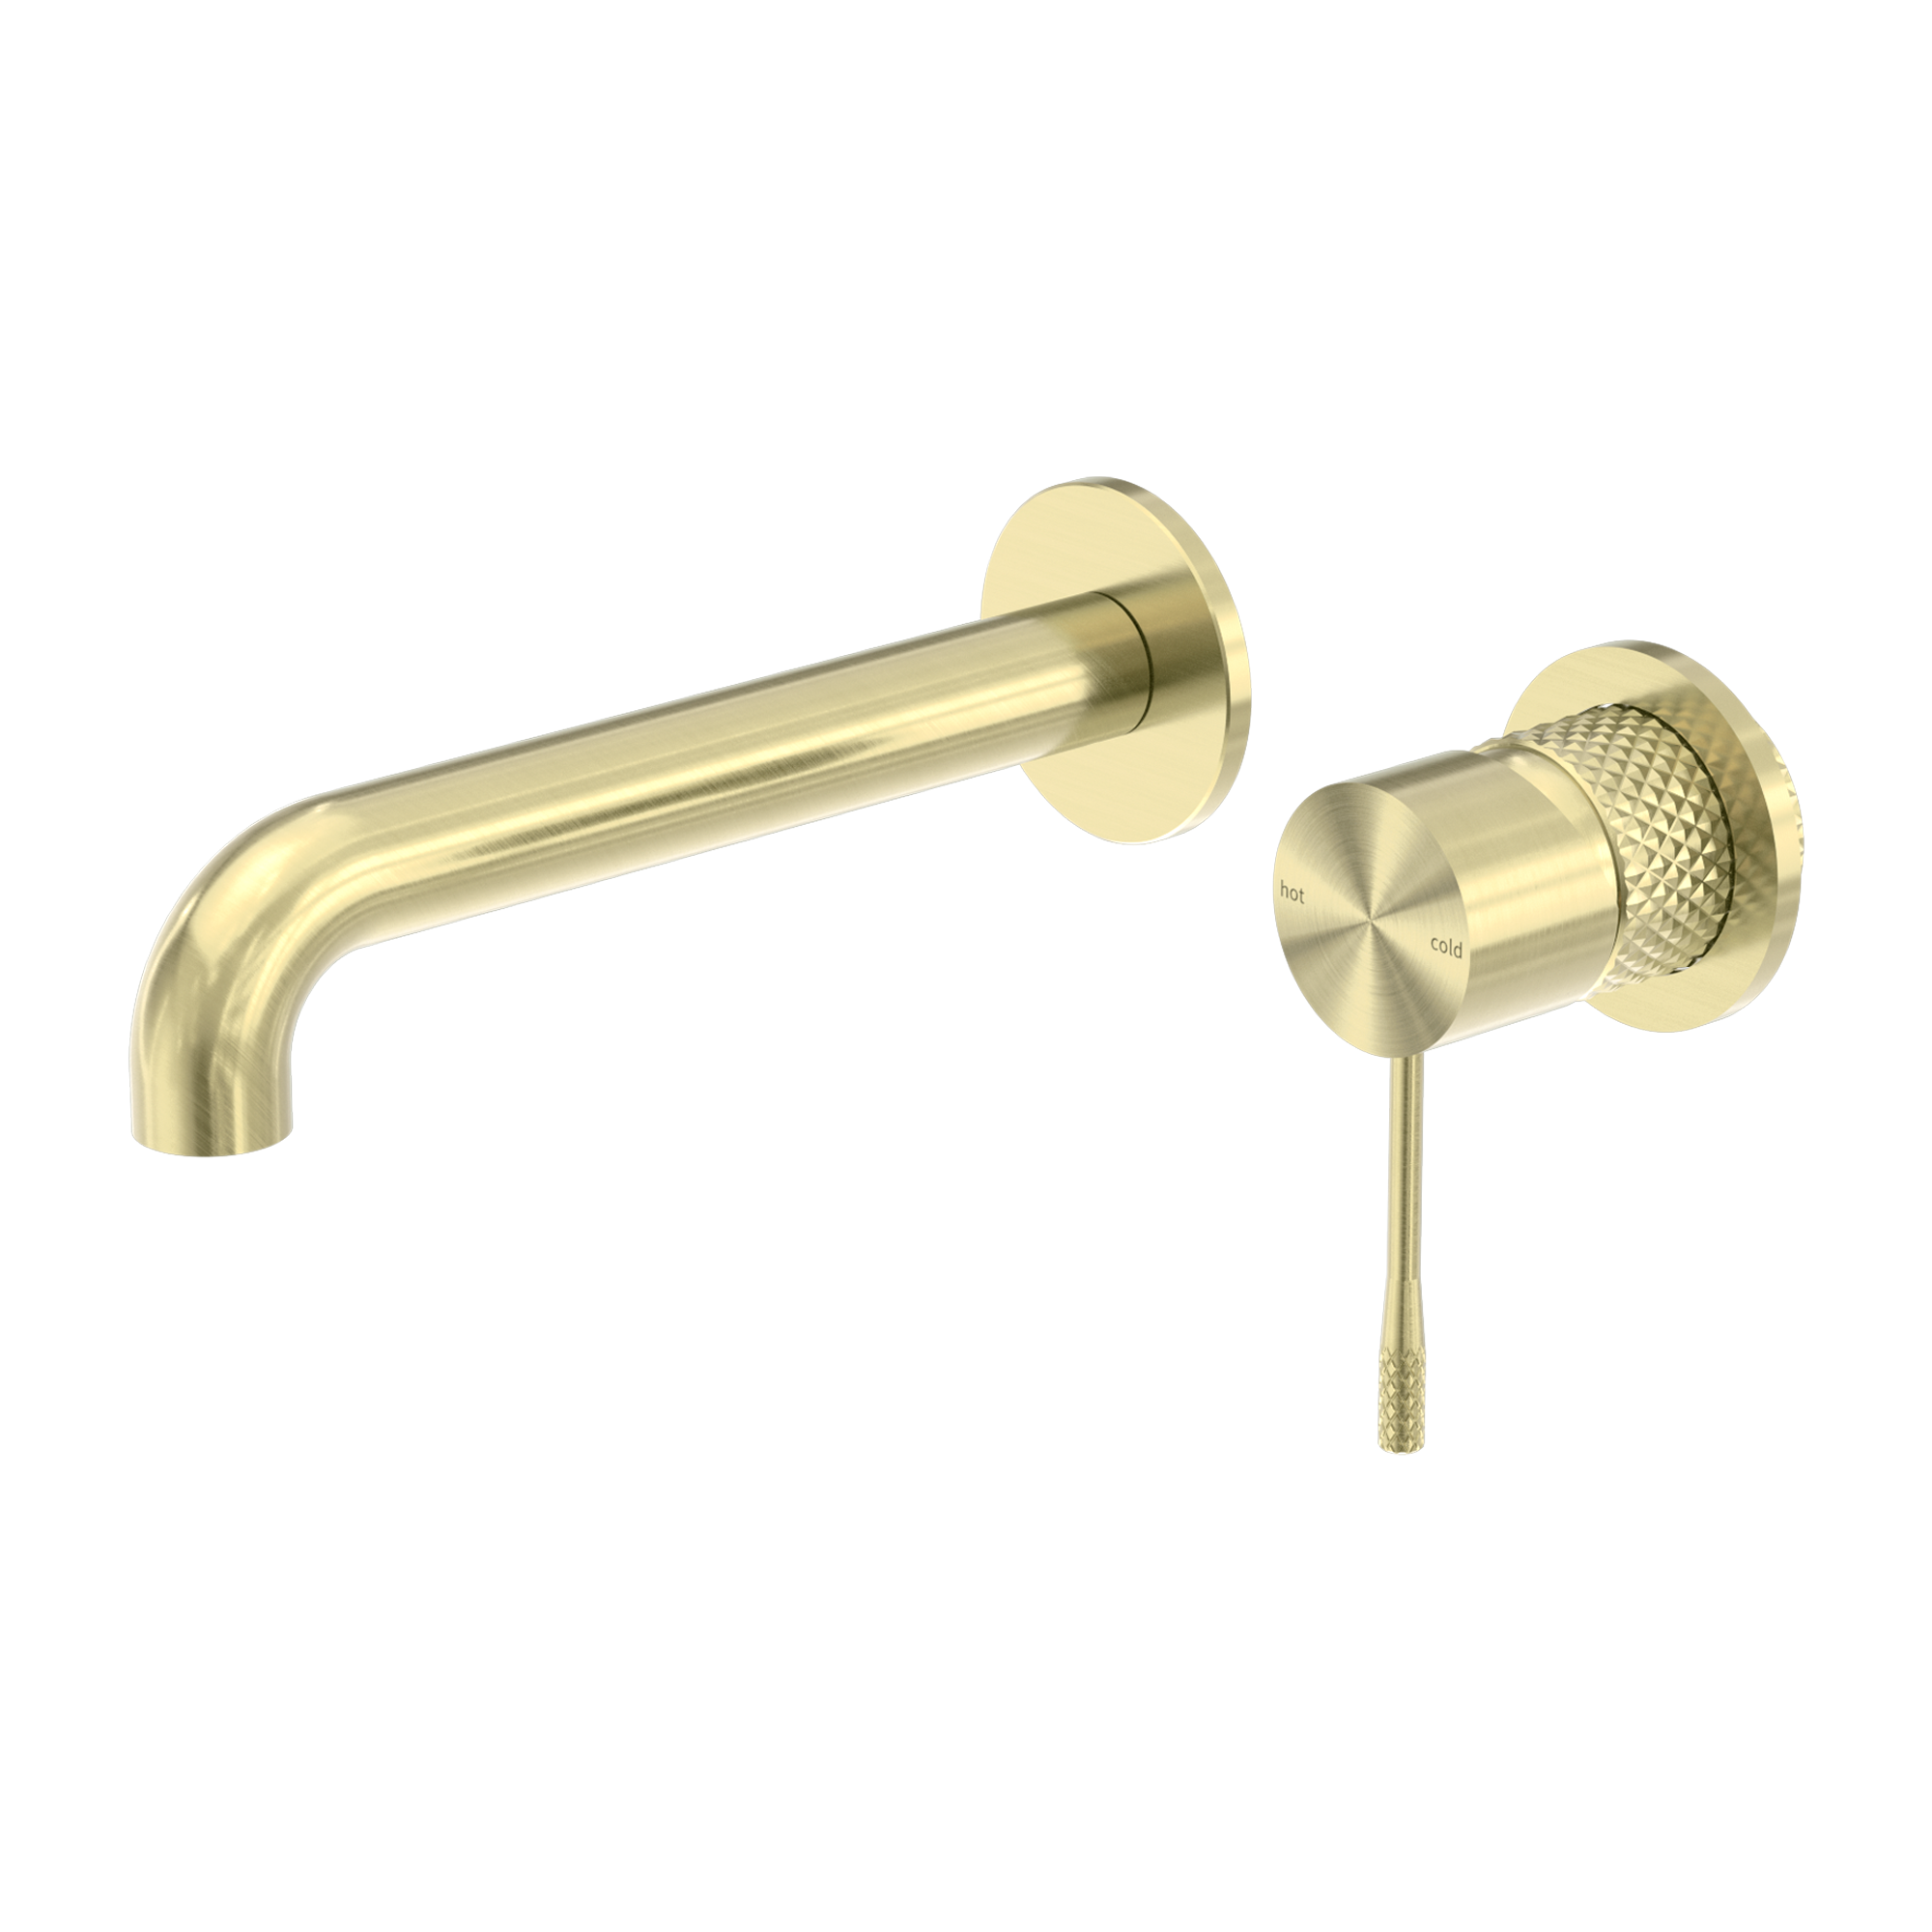 NERO OPAL WALL BASIN/ BATH MIXER SEPARATE BACK PLATE BRUSHED GOLD (AVAILABLE IN 120MM, 160MM, 185MM, 230MM AND 260MM)